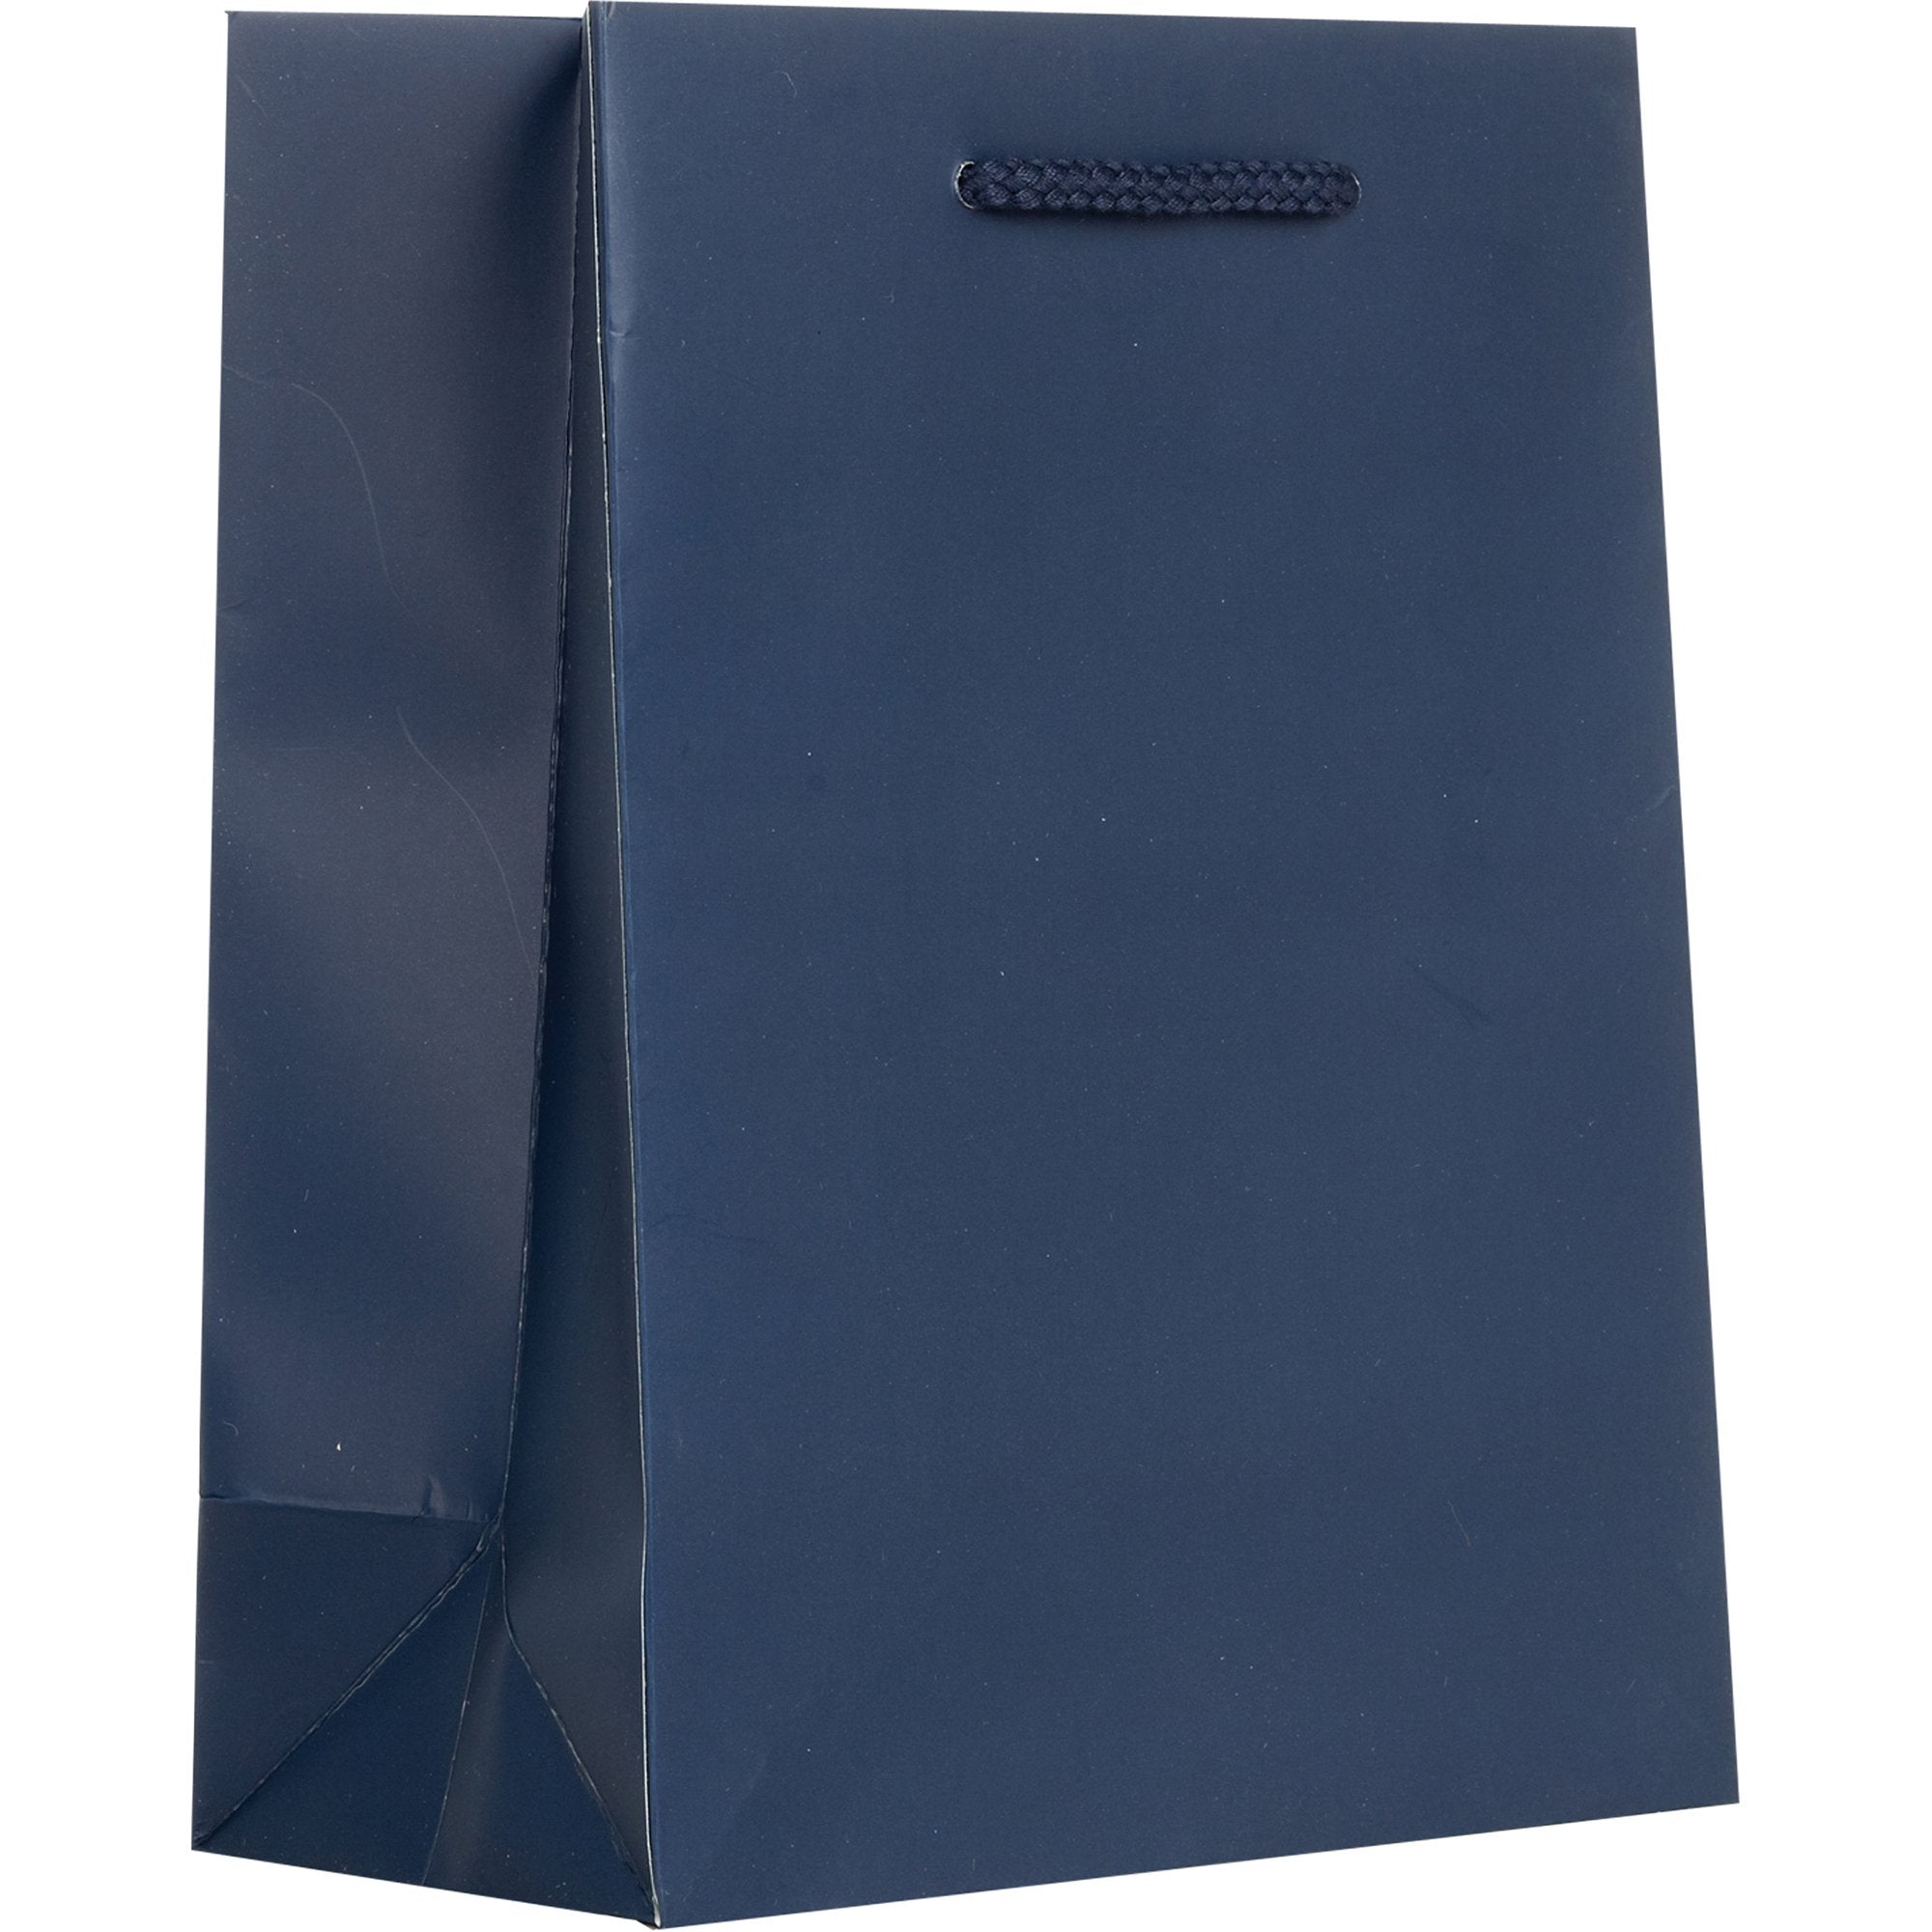 Heavyweight Solid Color Medium Gift Bags, Matte Navy Blue